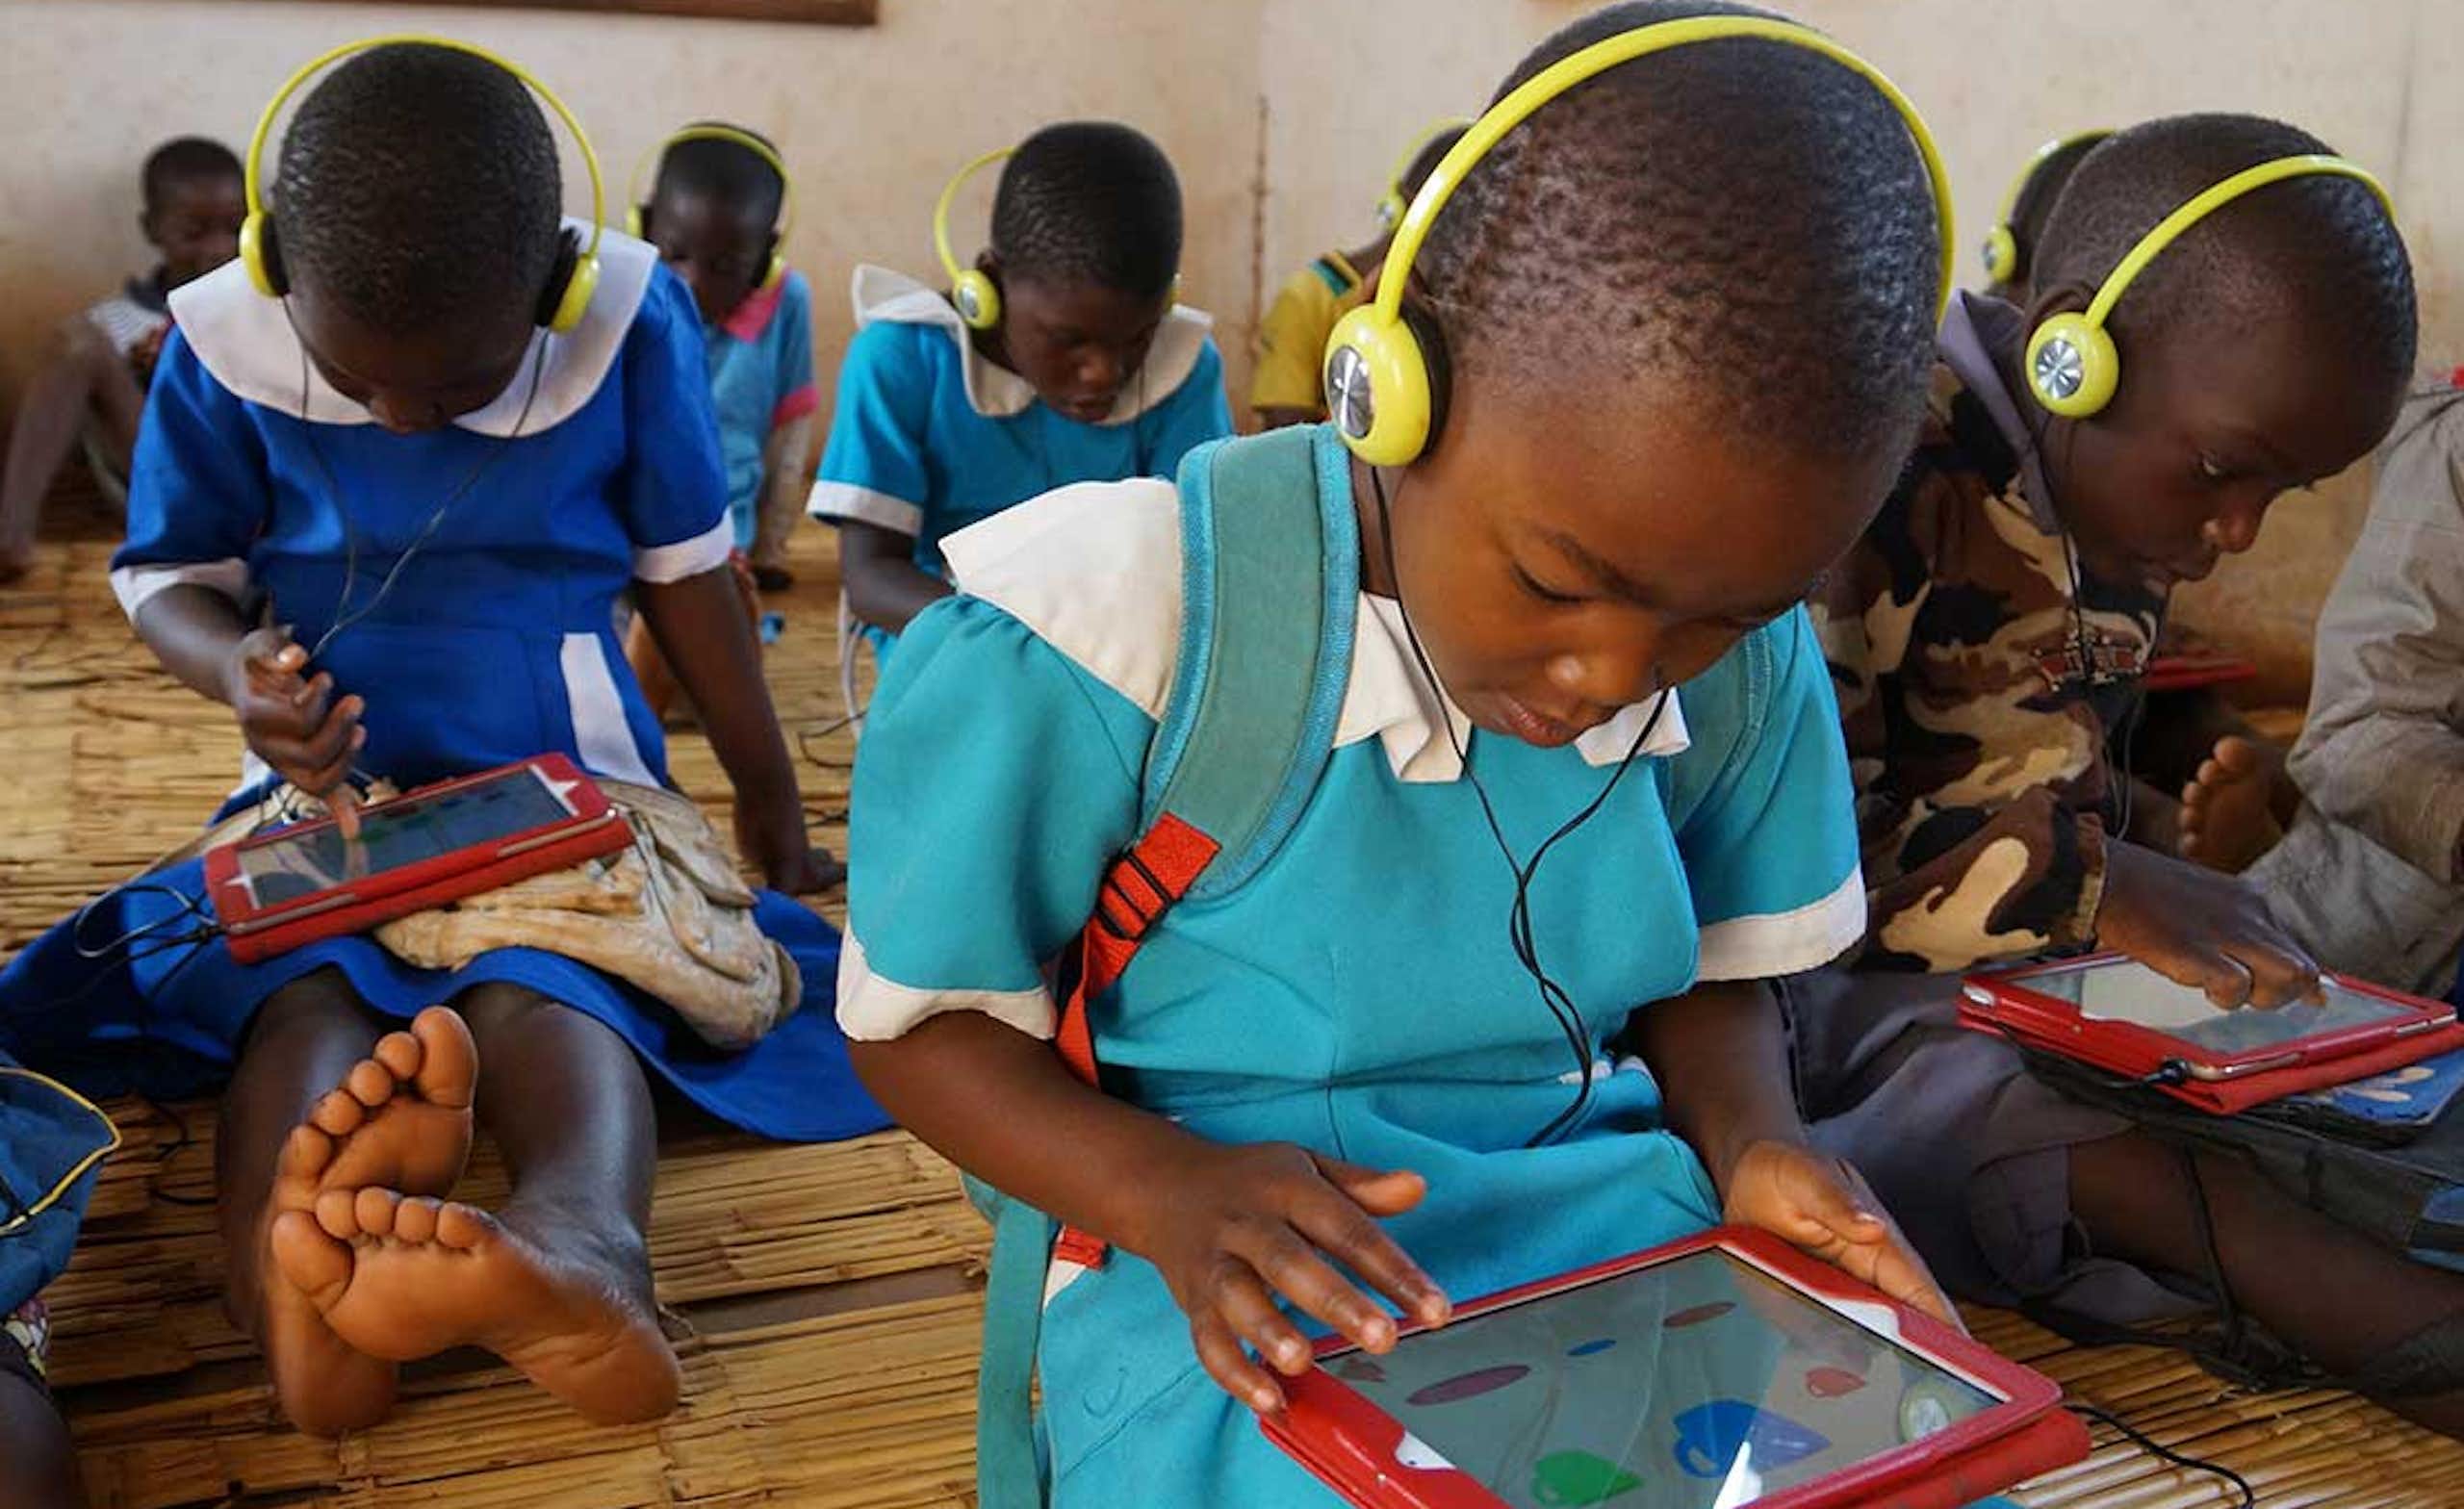 A group of children, most in blue school uniforms and yellow headphones, work on red computer tablets